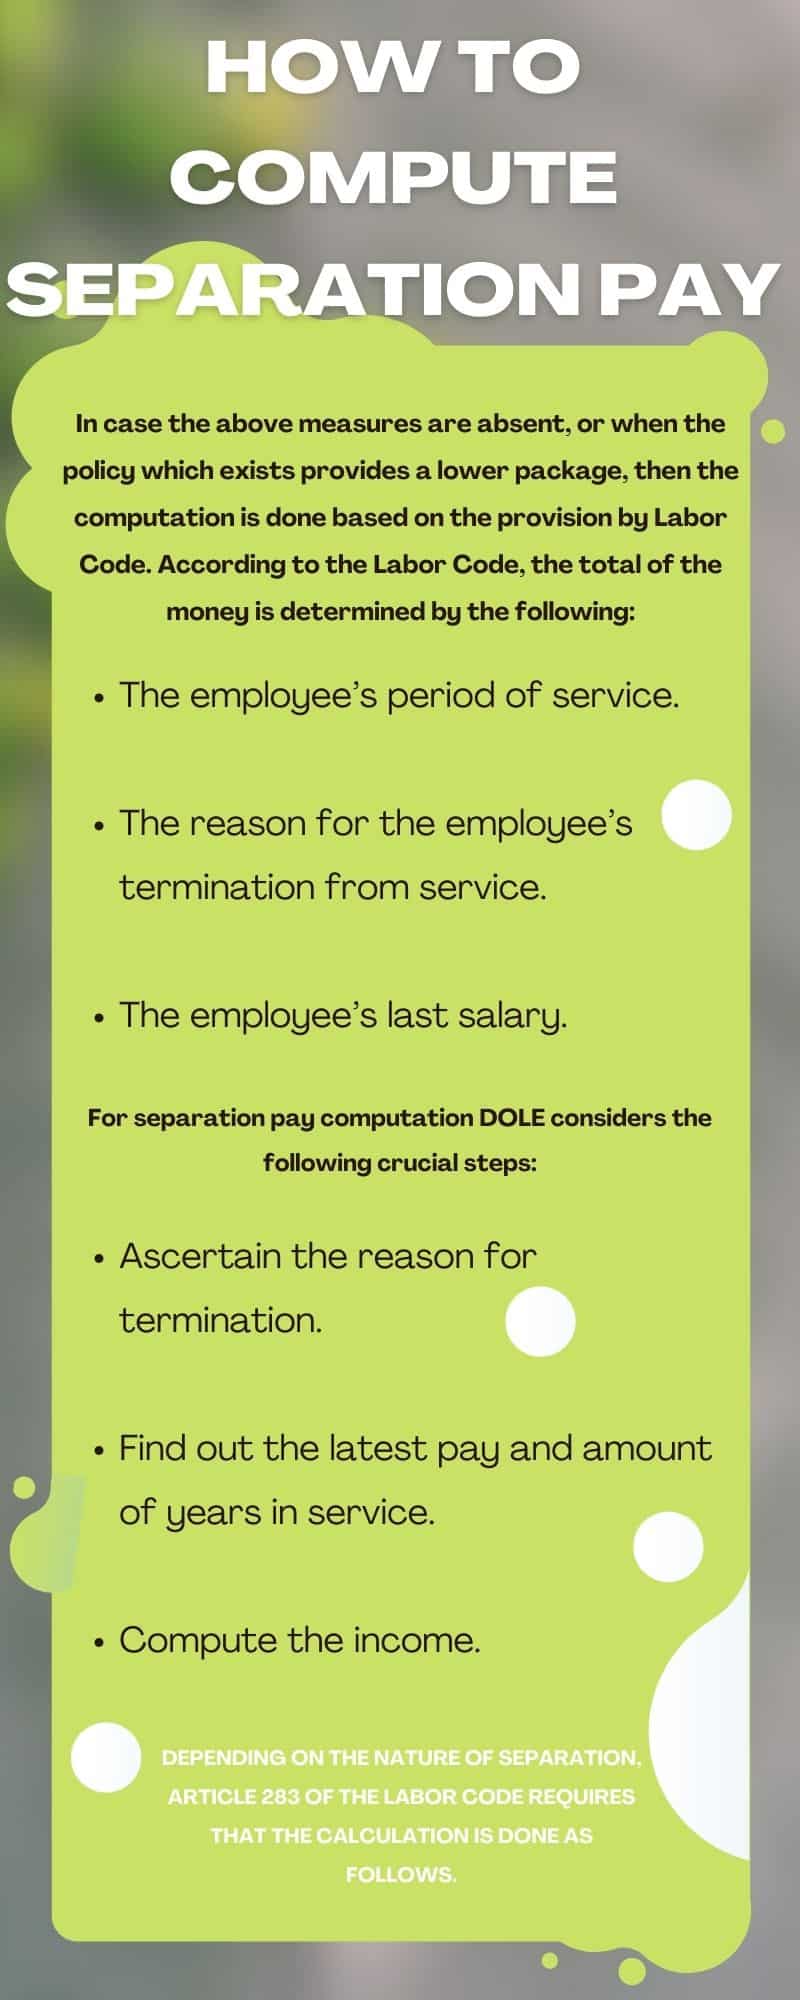 How to compute separation pay in Philippines